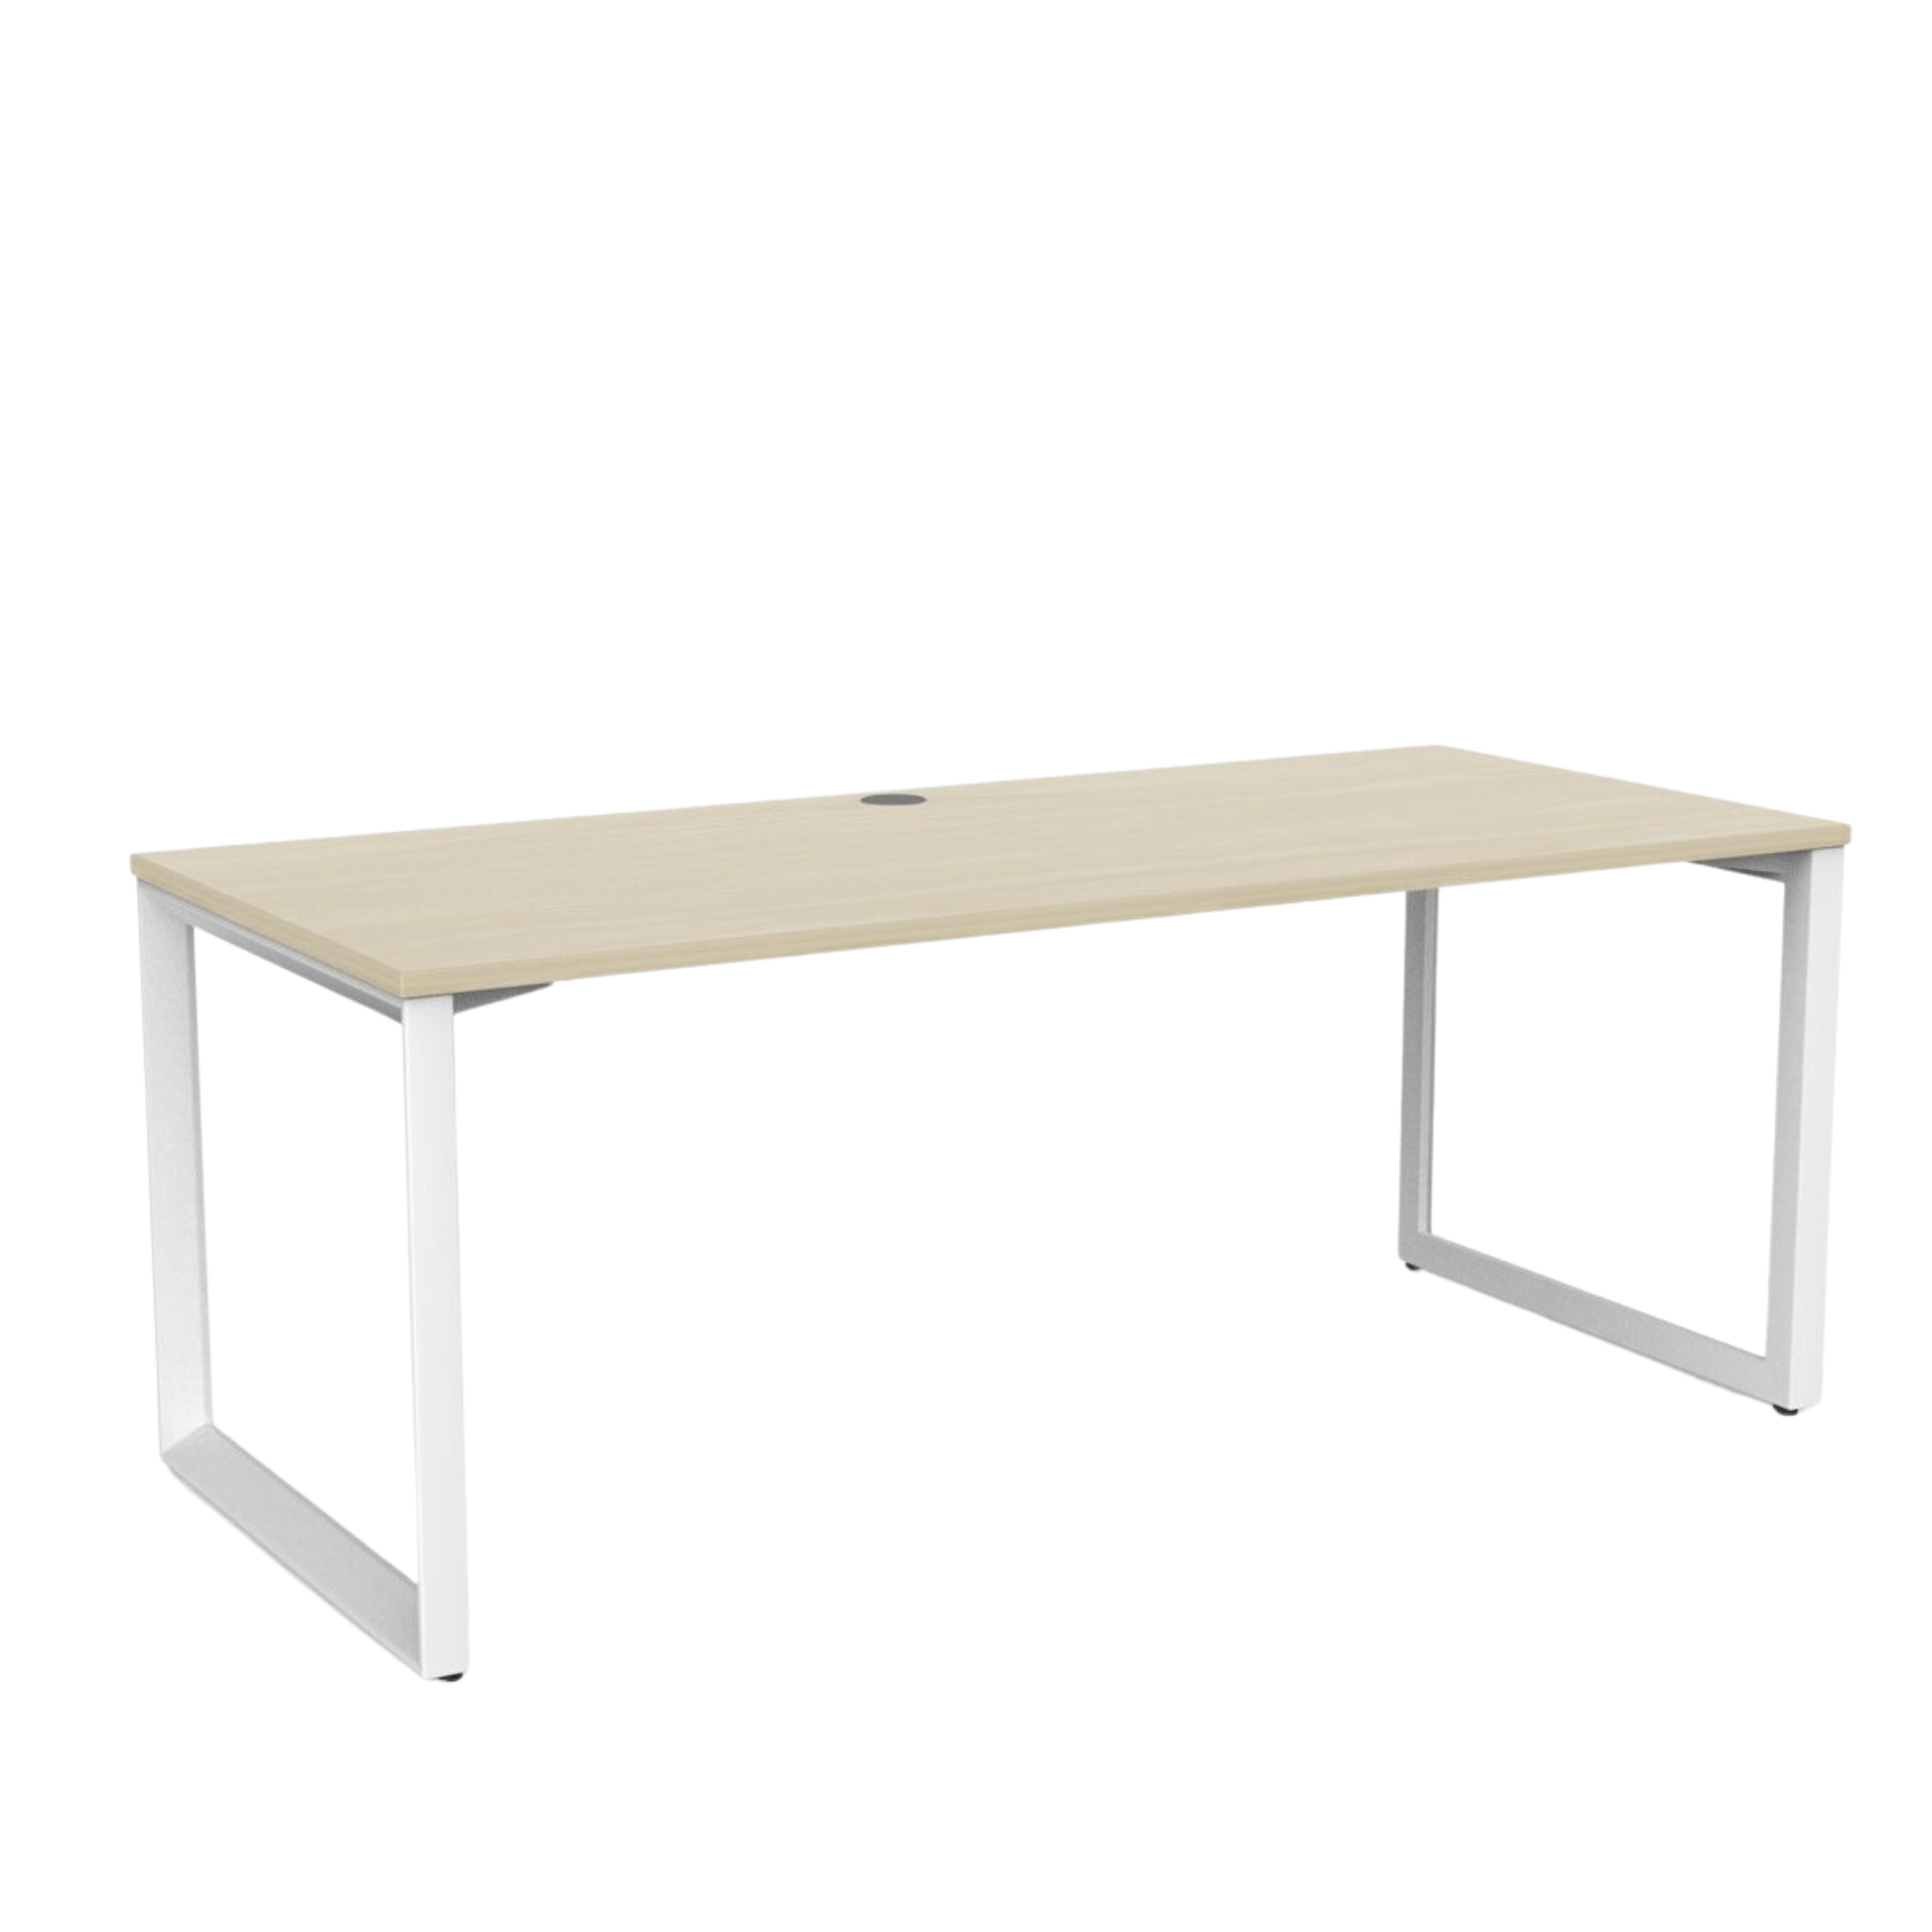 Anvil fixed height desk with white metal frame and nordic maple metleca top